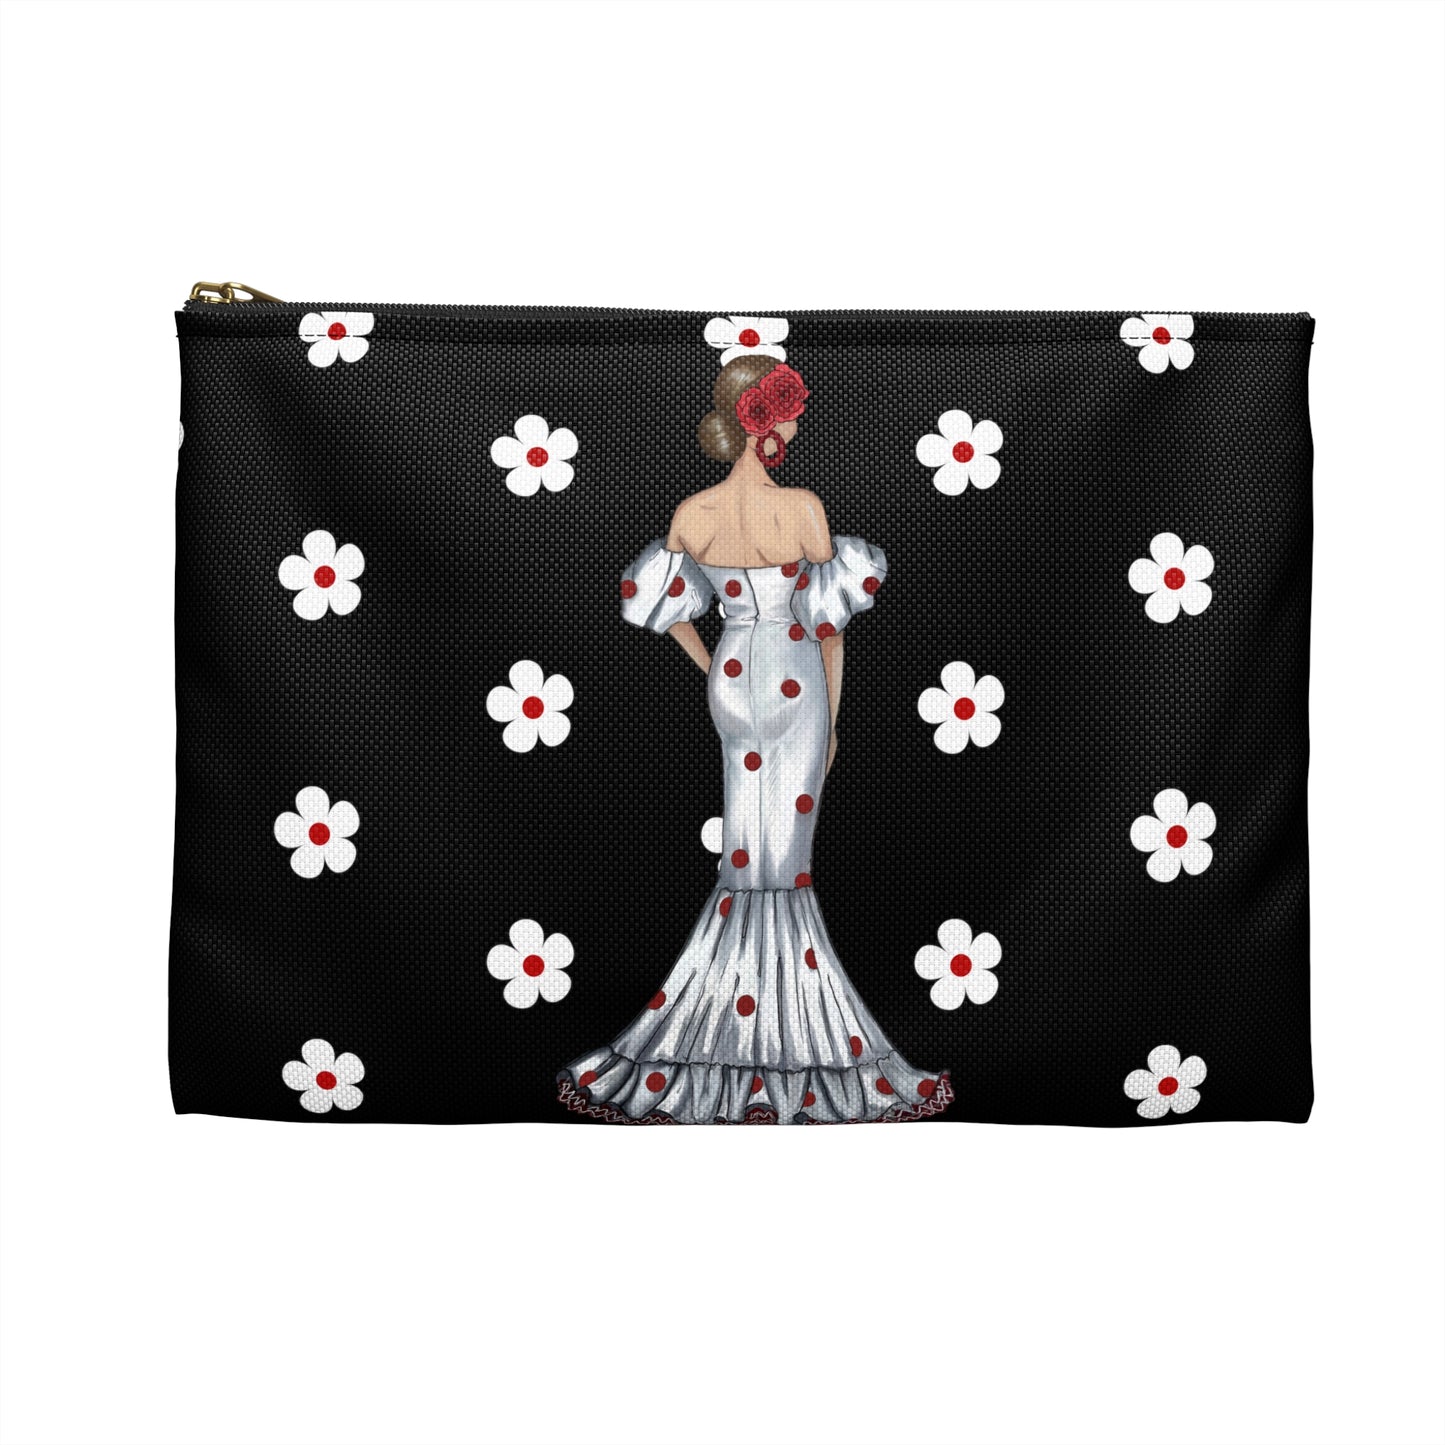 a black and white purse with a woman in a dress on it